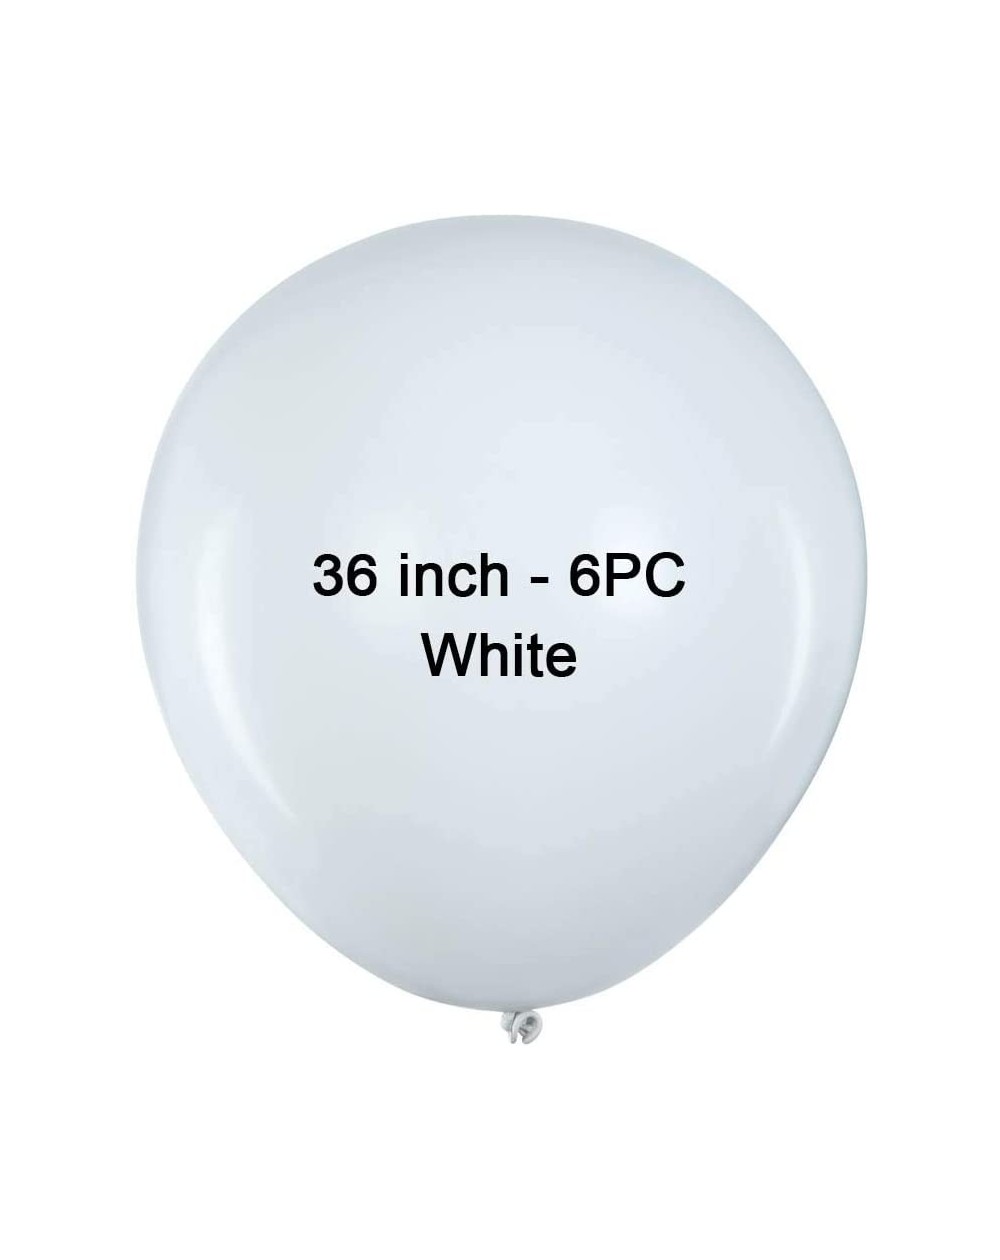 Balloons 36 inch White Latex Balloons Large Round Balloon Giant Latex Balloons Jumbo Big Balloons for Birthday Wedding Party ...